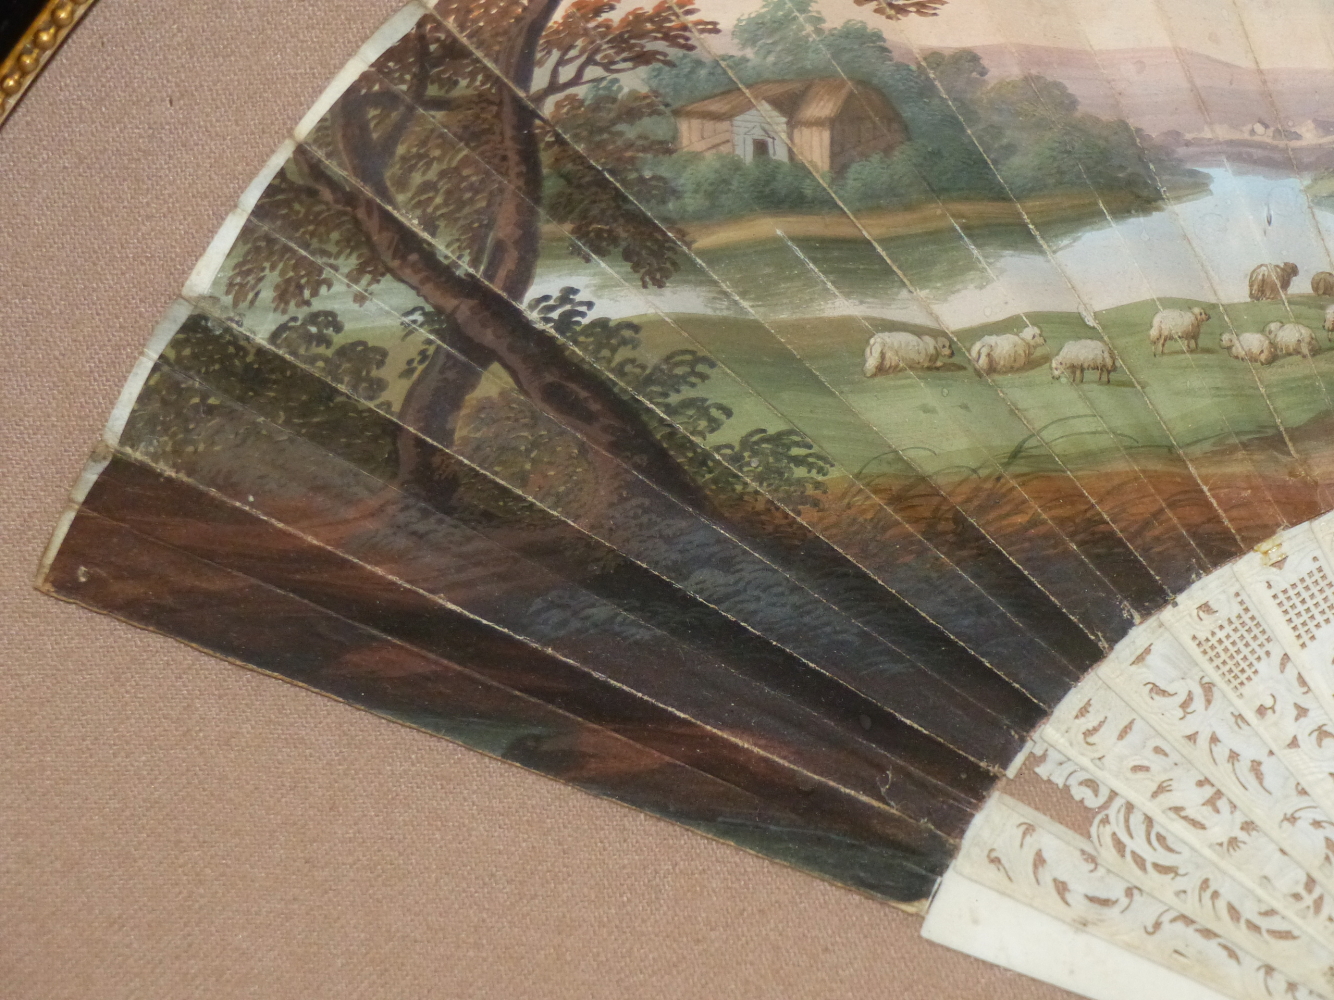 A FRAMED FAN WITH THE LEAF PAINTED WITH A FLAUTIST ENTERTAINING A LADY SEATED BEFORE SHEEP GRAZING - Image 6 of 7